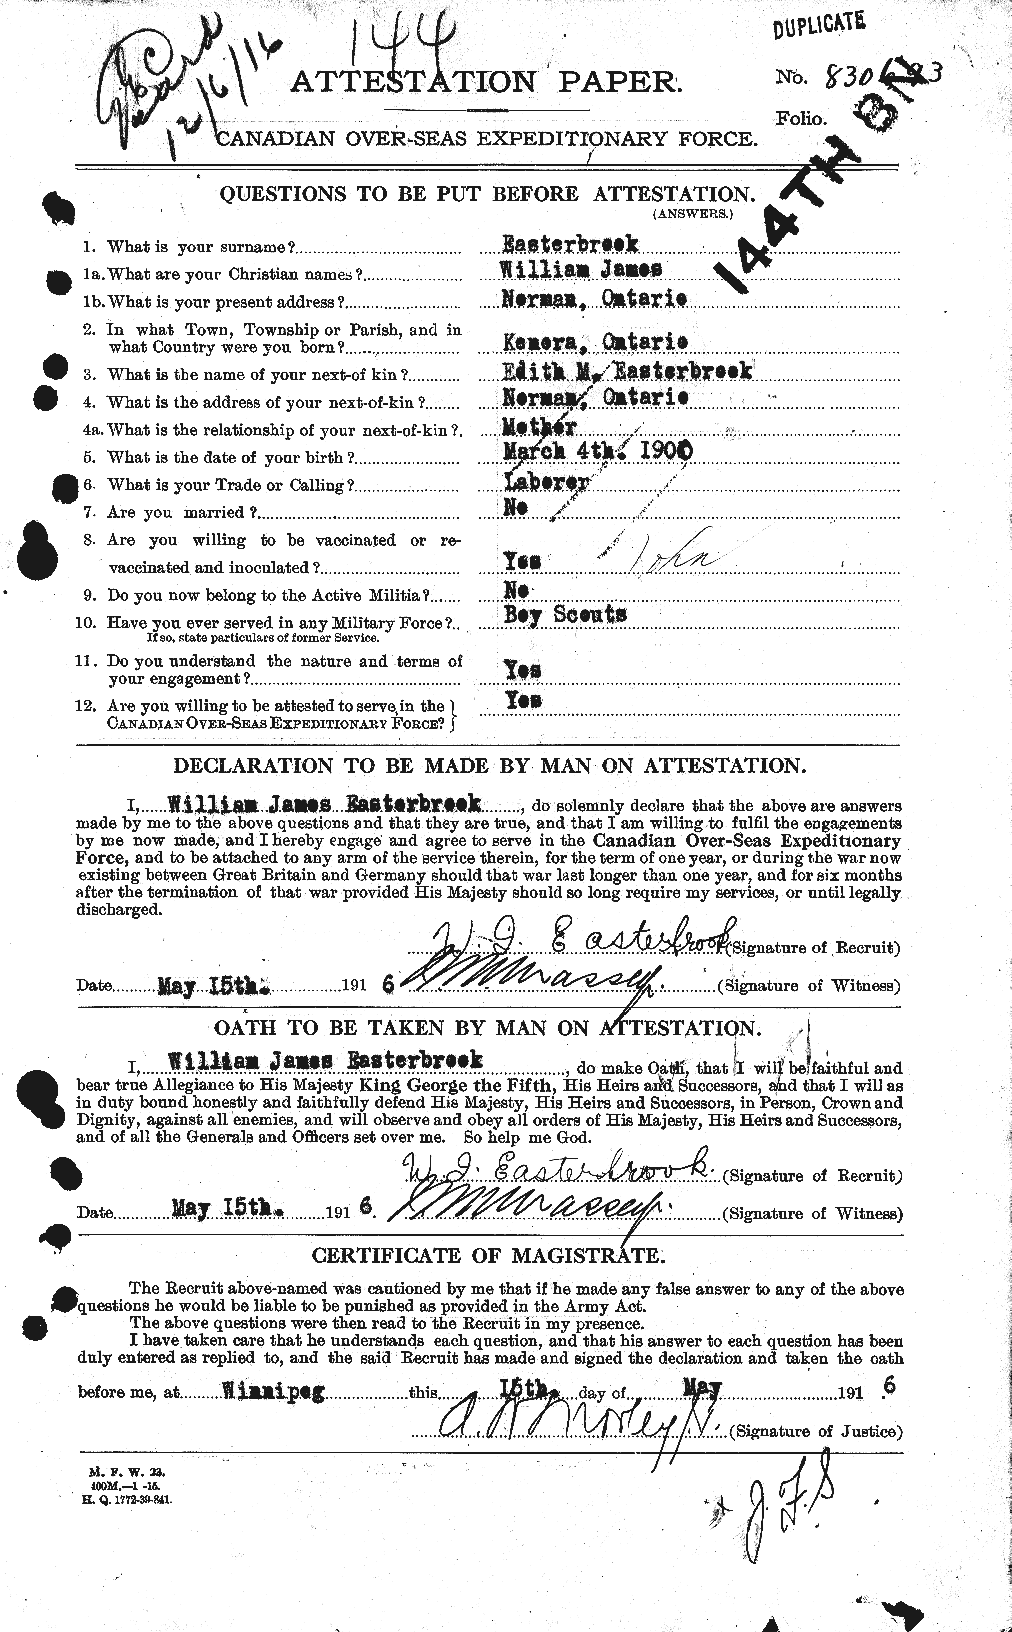 Personnel Records of the First World War - CEF 307726a